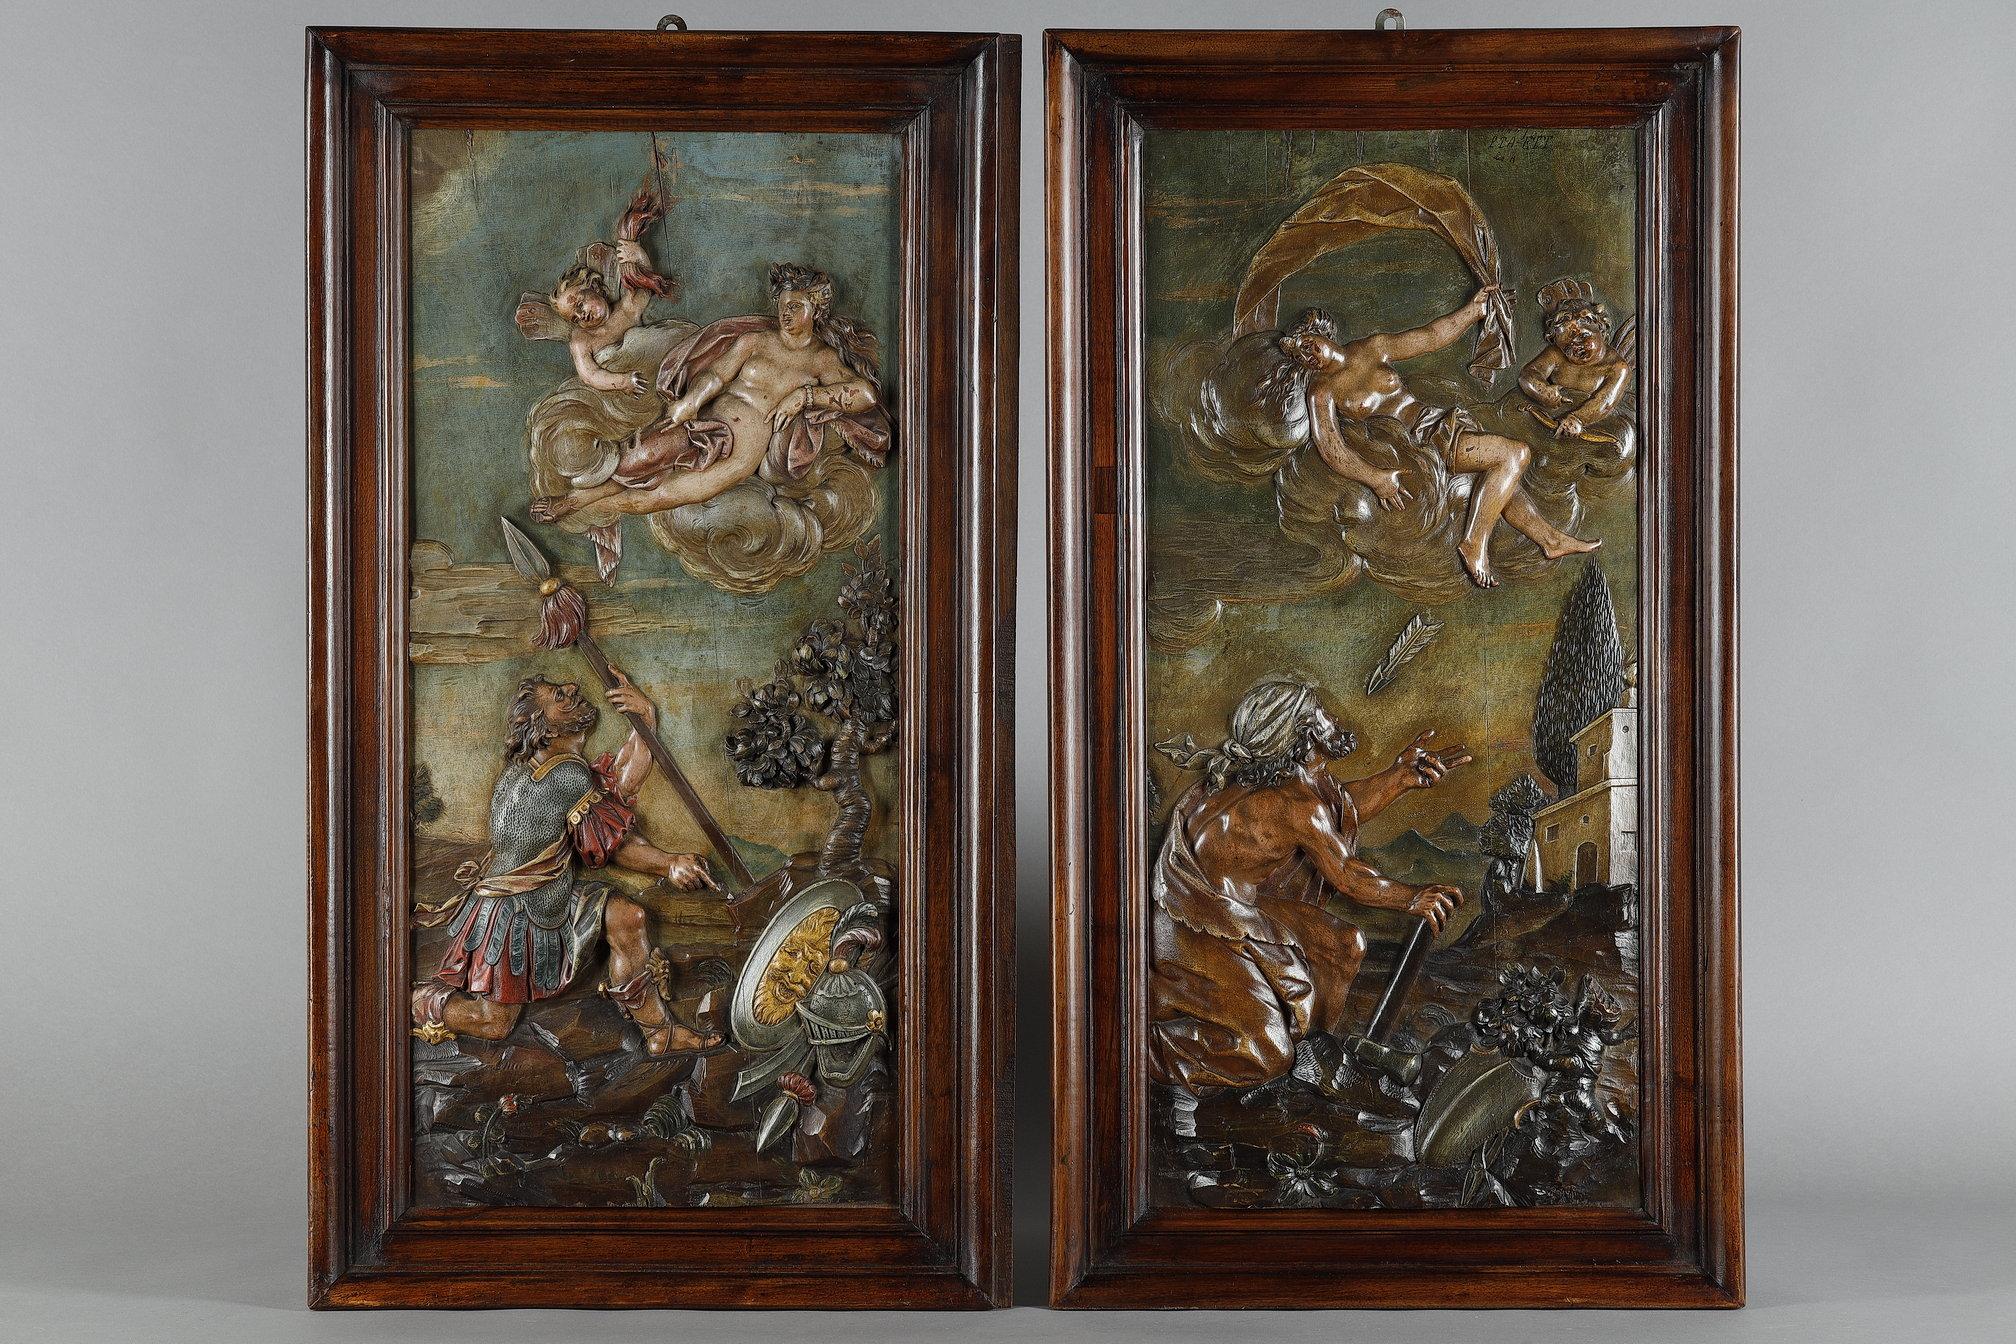 Rare suite of four bas-relief carved and polychromed limewood panels depicting mythological scenes, European work from the first half of the 18th century. The panels depict various mythological scenes related to the goddess Venus (Aphrodite). The